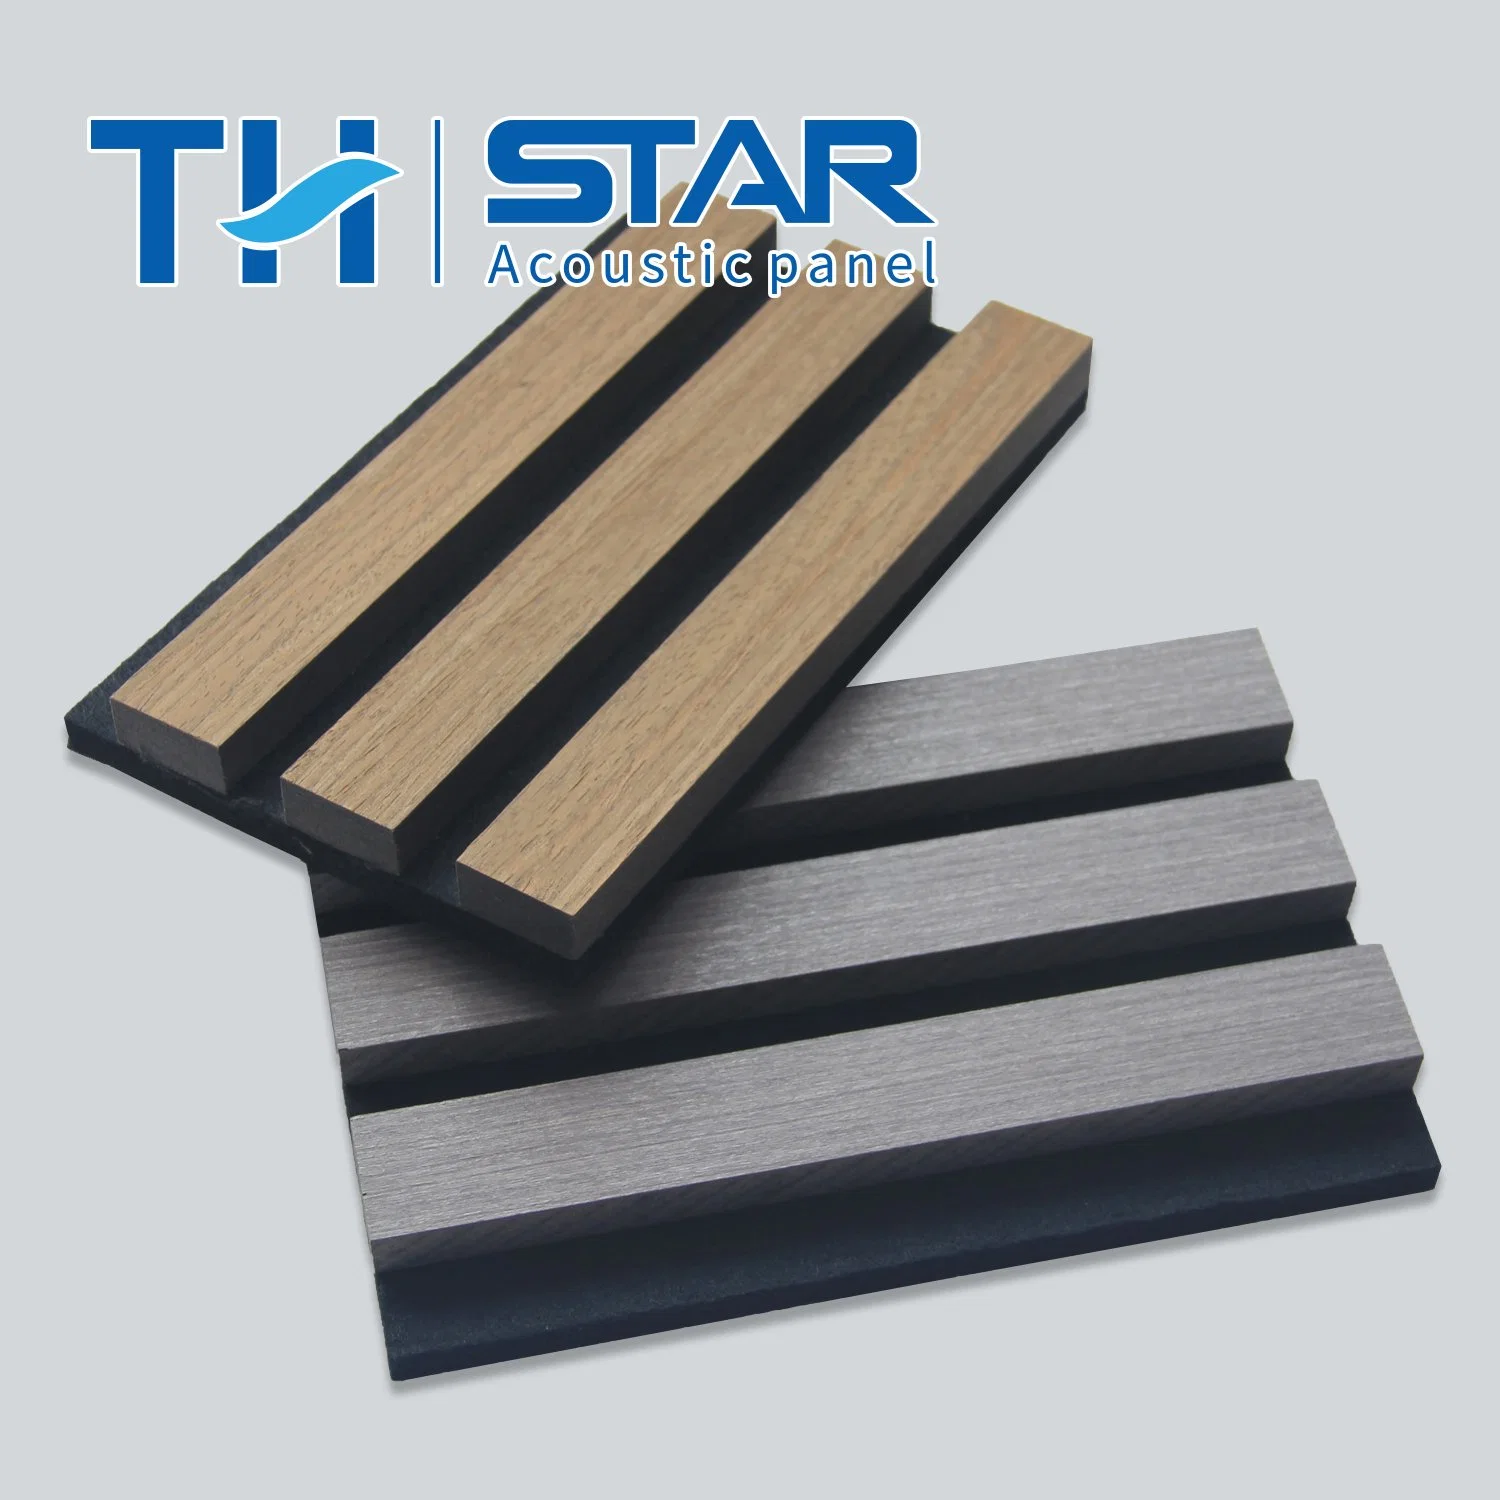 Hengjiu Wood Slat Acoustic Panel Home Office Decor Wood Wool Acoustic Panel Sound Absorbing Wall Panels with Polyester Fiber